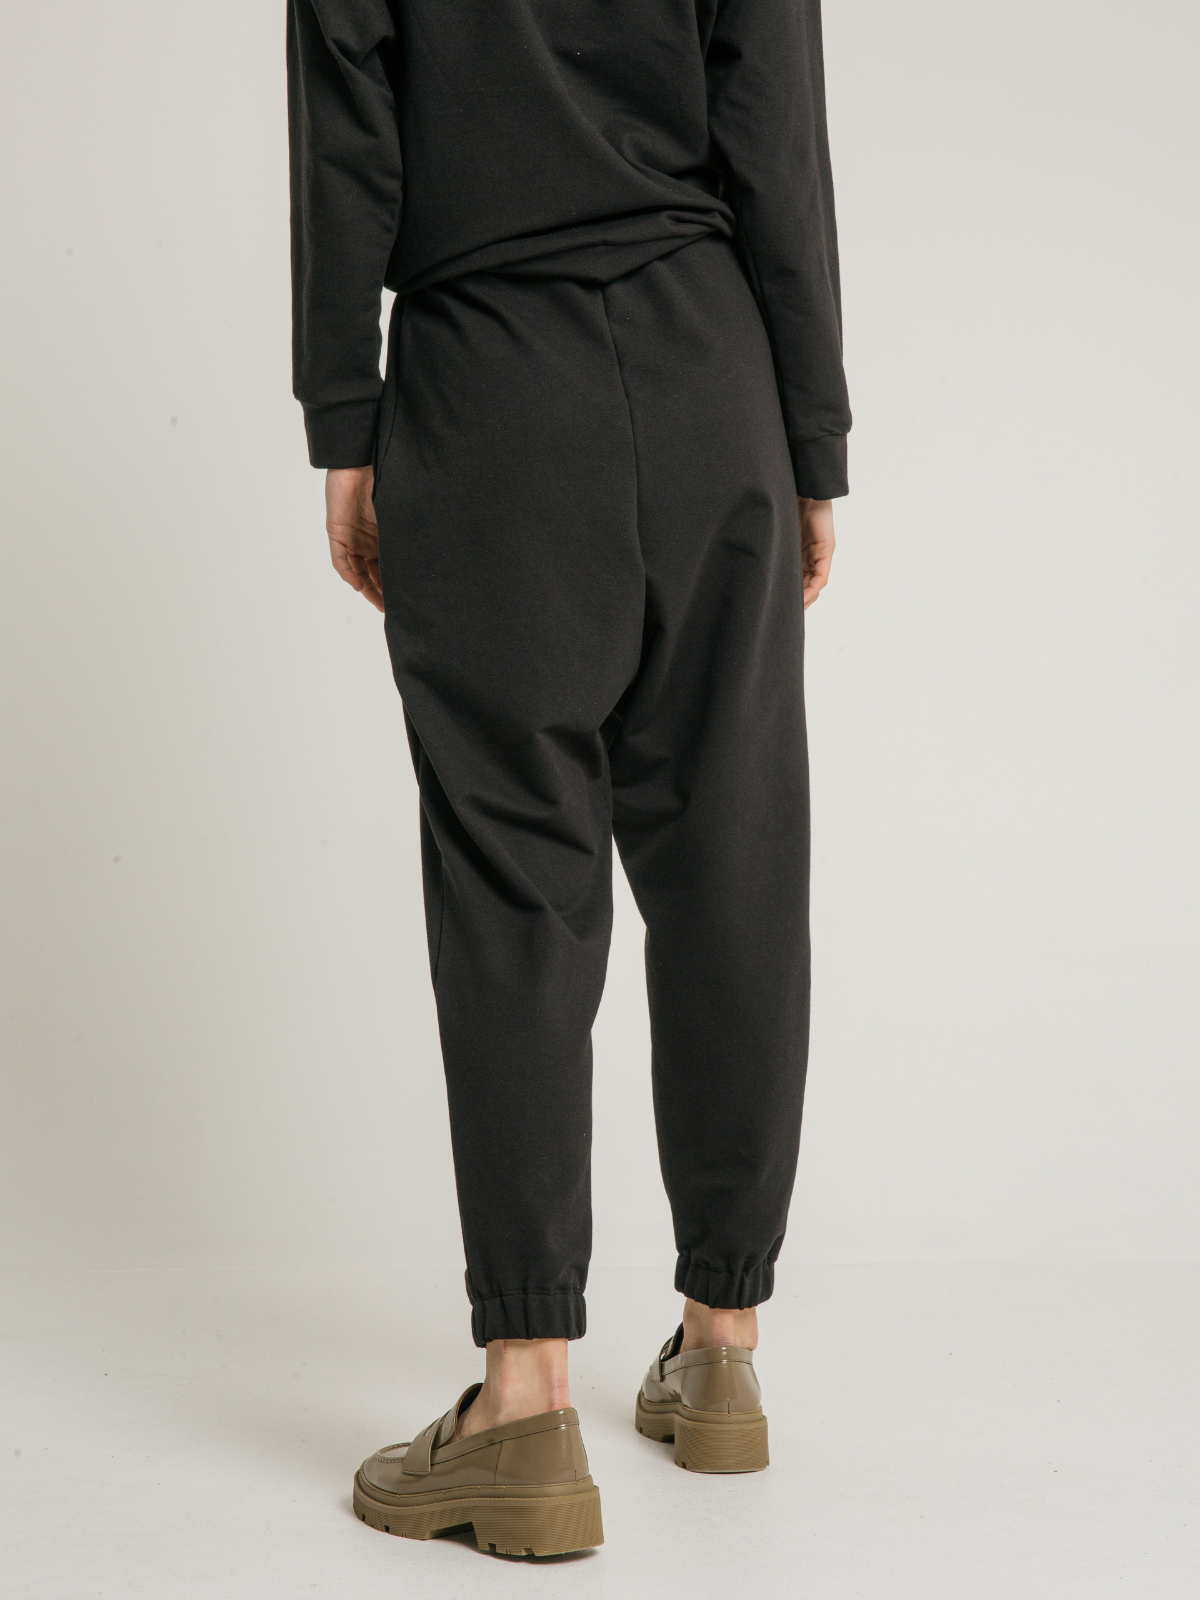 Black french terry loose pants for women